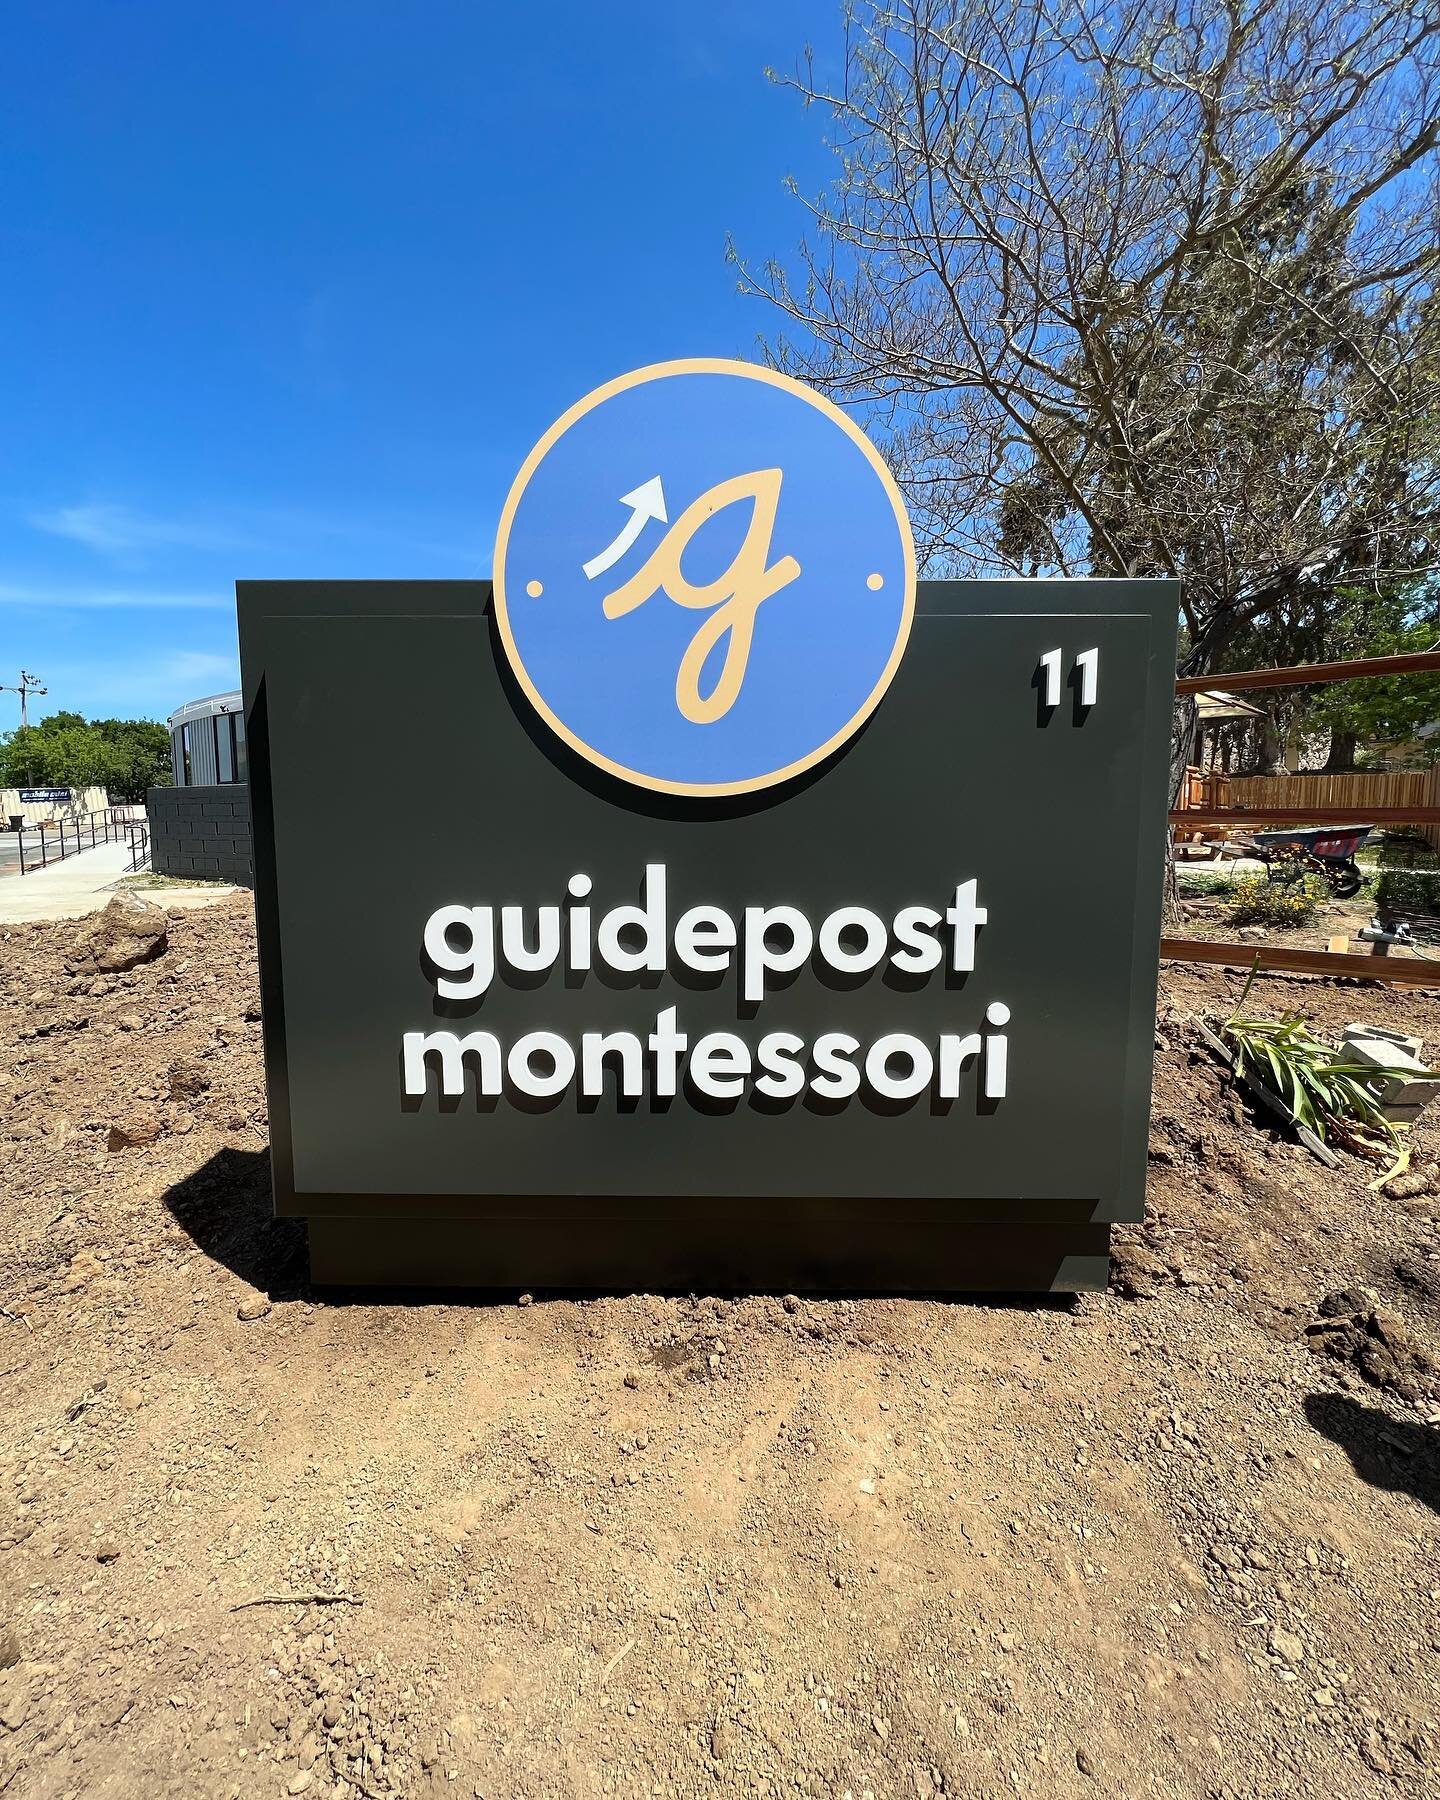 Guidepost Montessori school in San Rafael has almost completed construction! Check them out for your kid! Also check out the awesome signage! Manufactured by @signtechusa and installed by @johnstonsigns